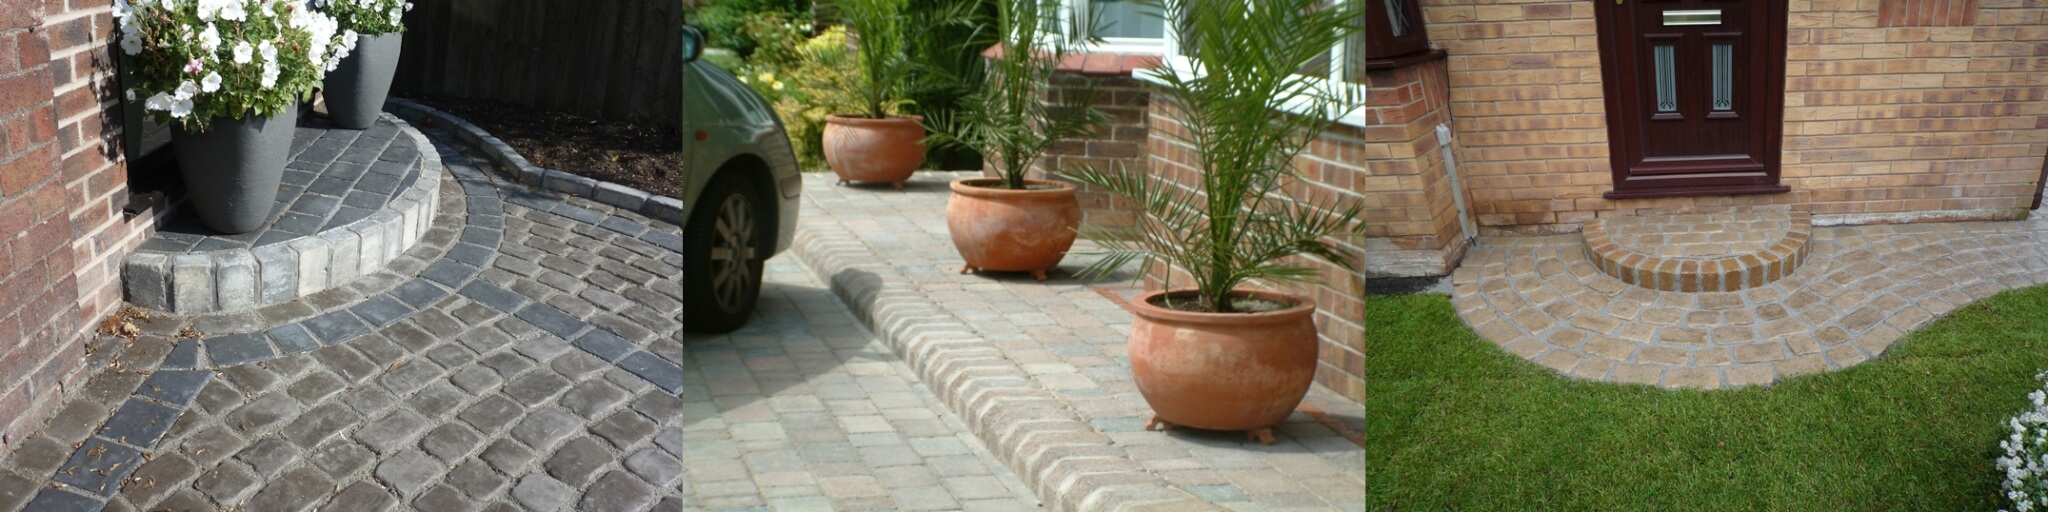 Driveway Installers Cheshire